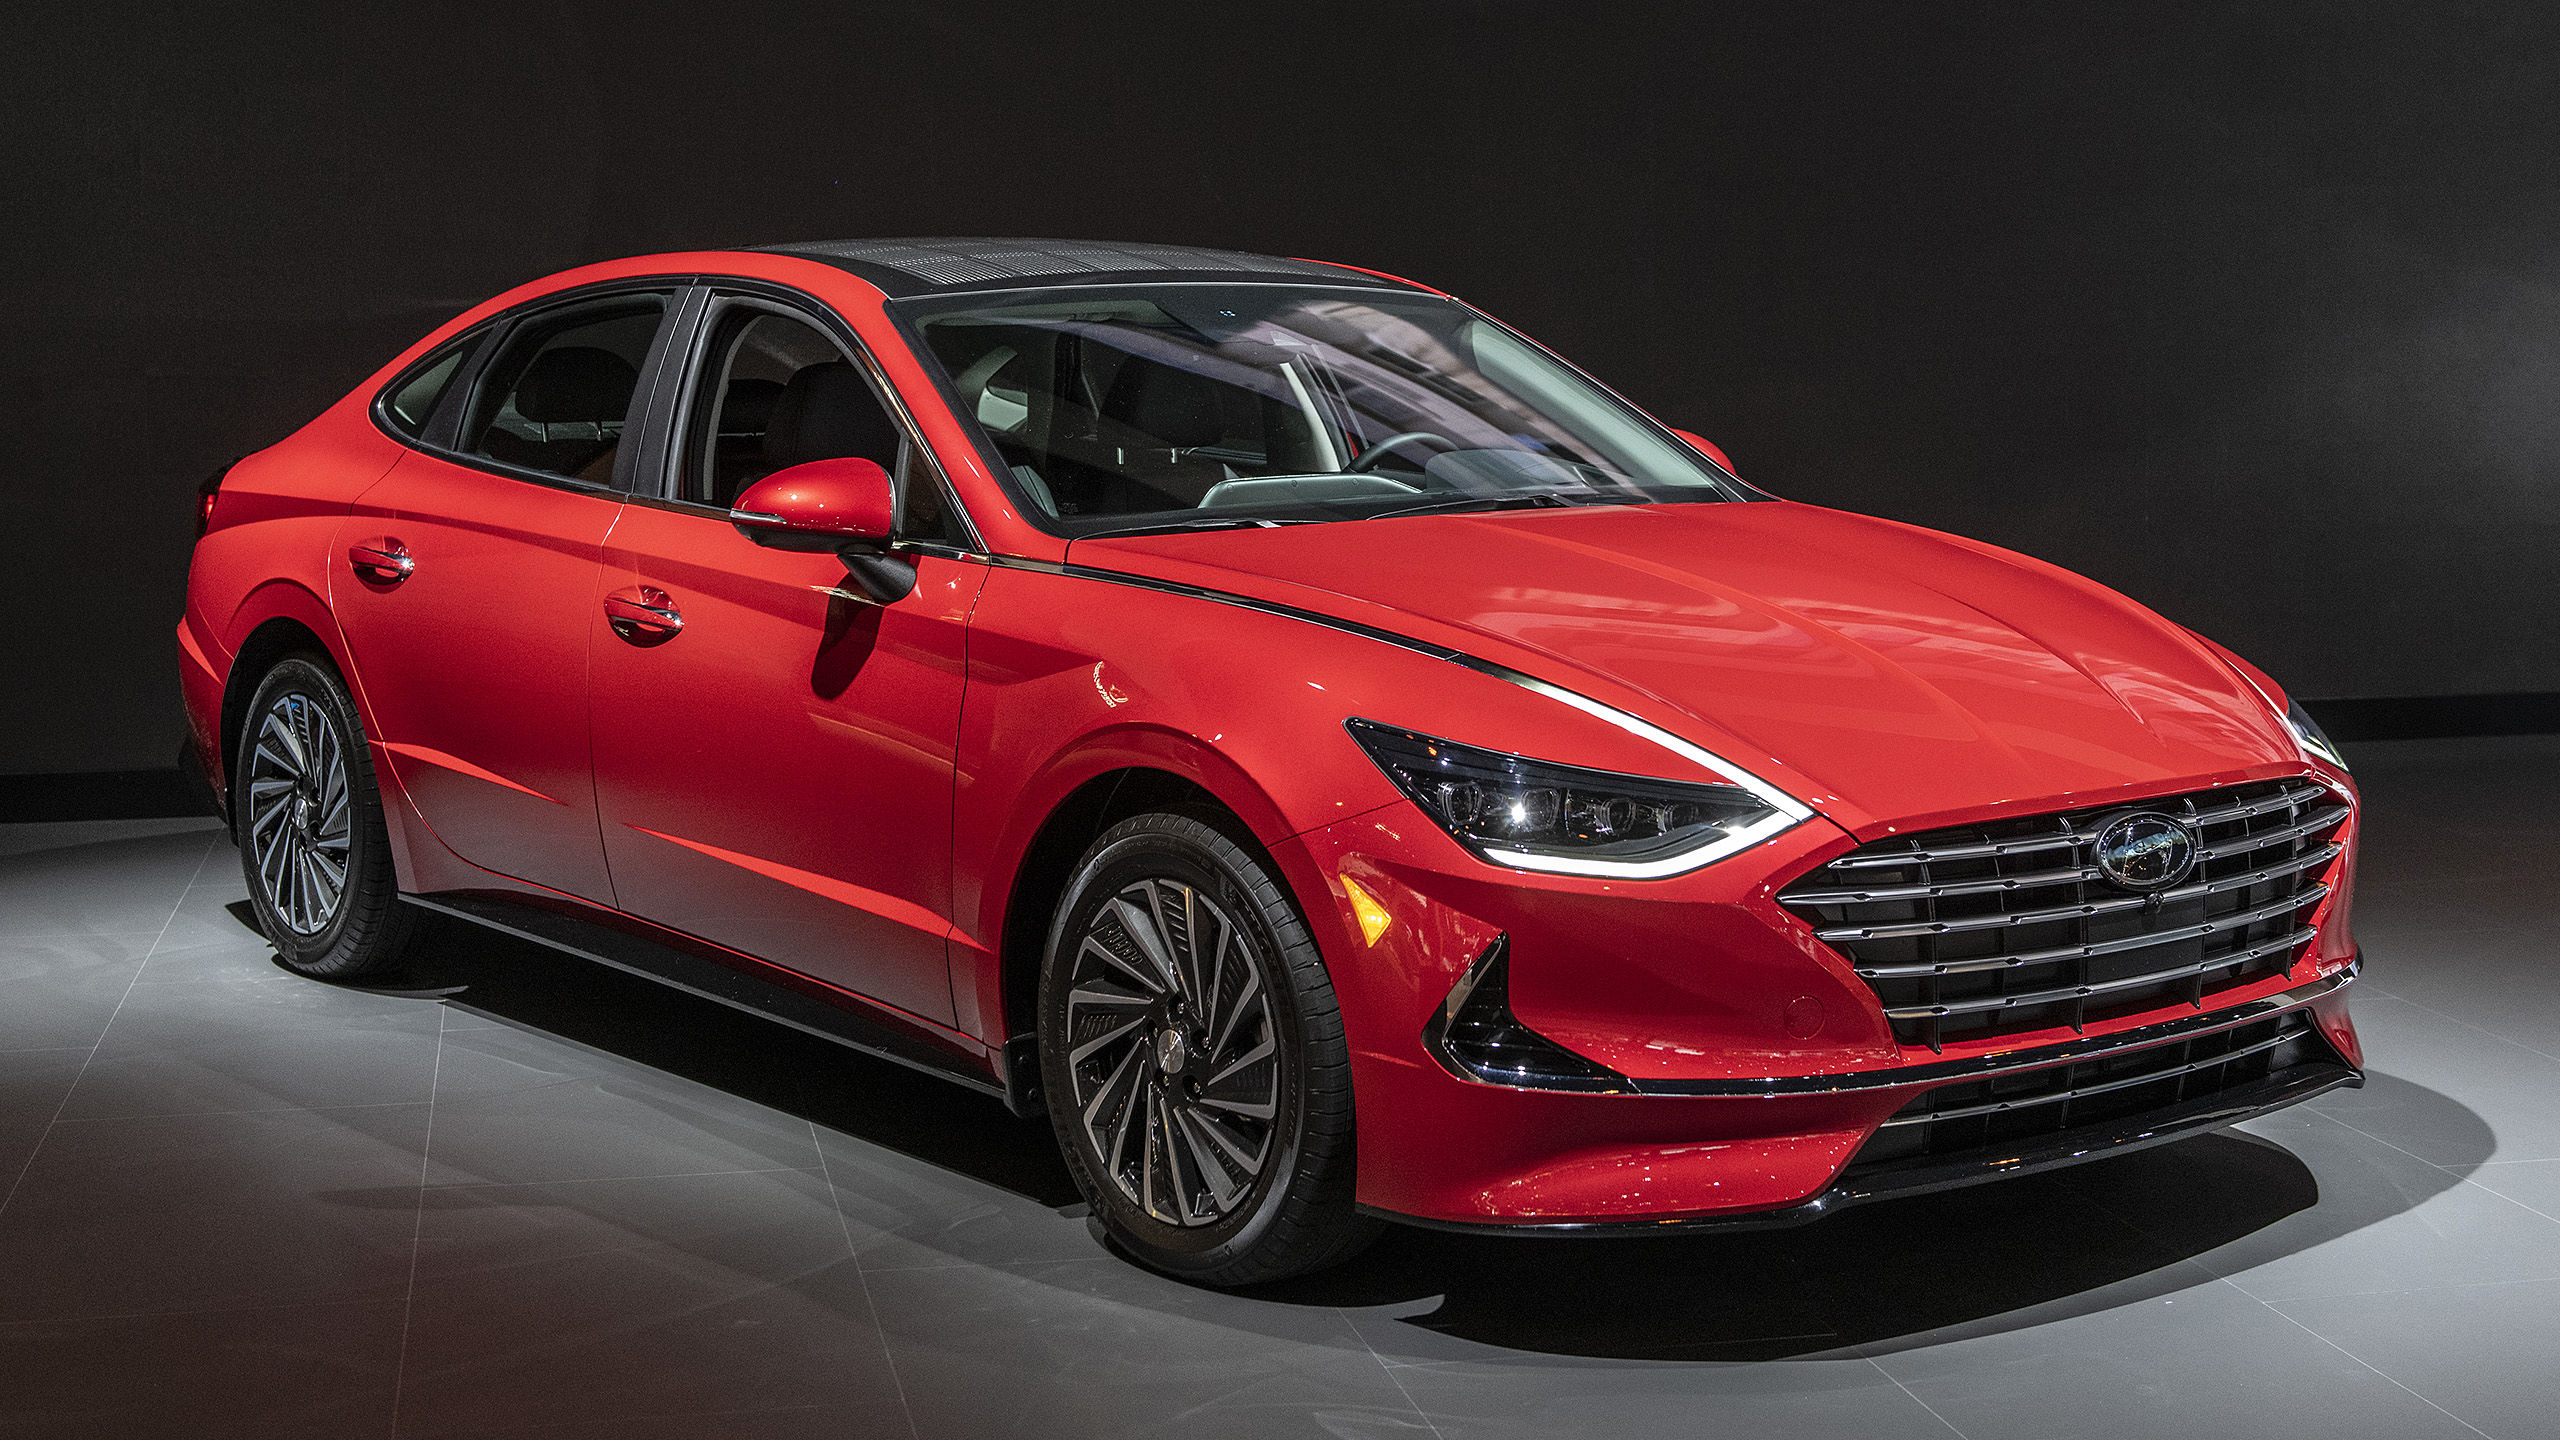 the-2020-hyundai-sonata-hybrid-offers-class-leading-52-mpg-combined